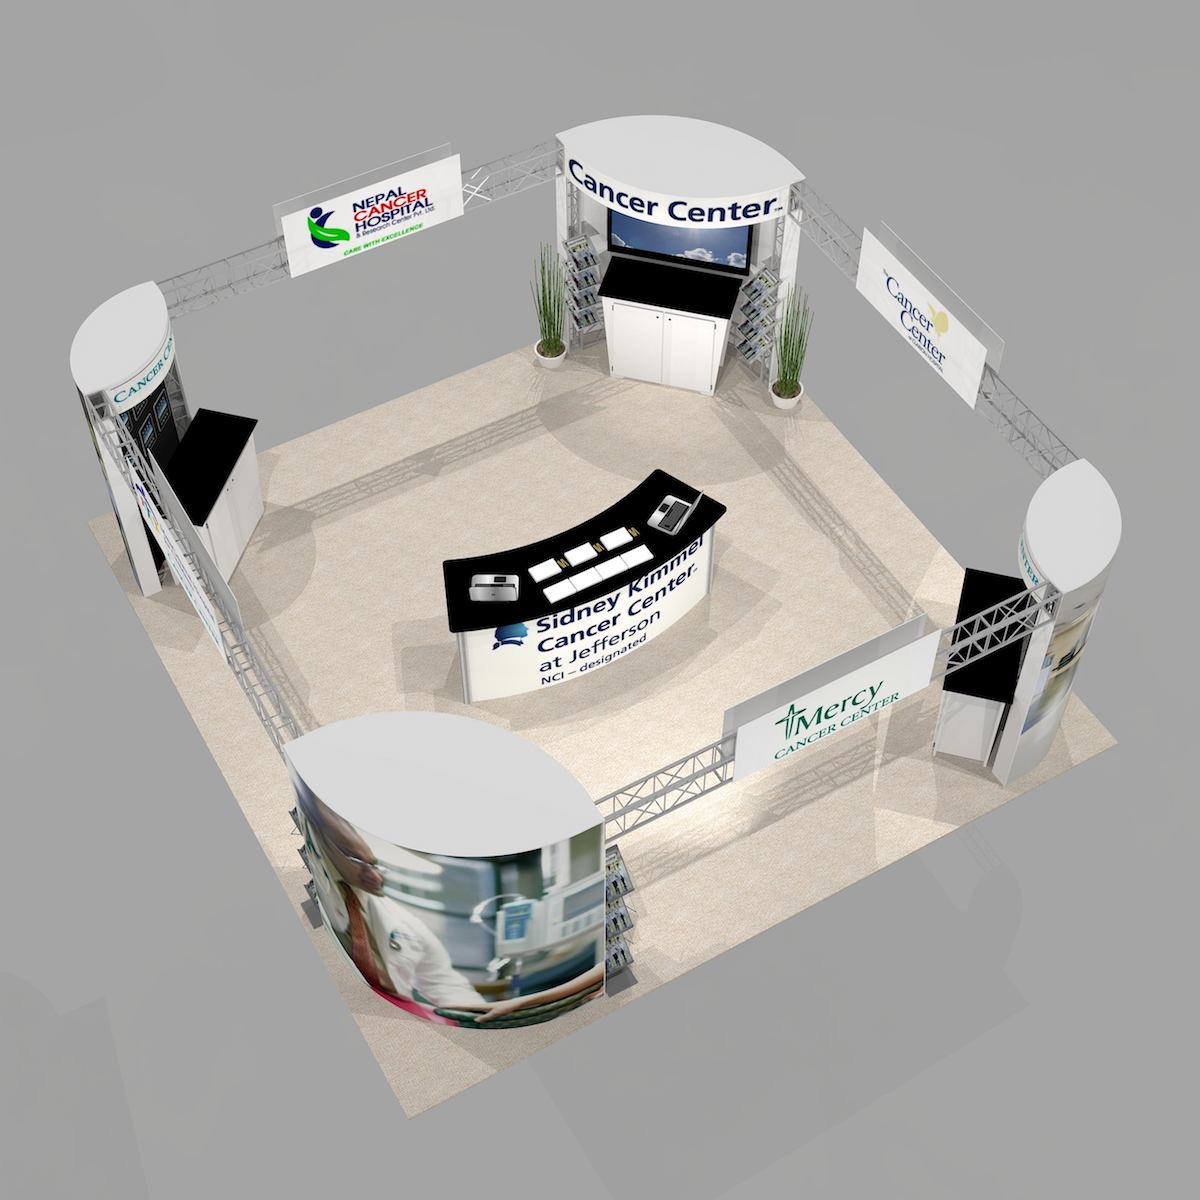 ch2020 Trade show rental exhibit design chi2020 shows a presentation or demonstration area with ample room for seating or product display